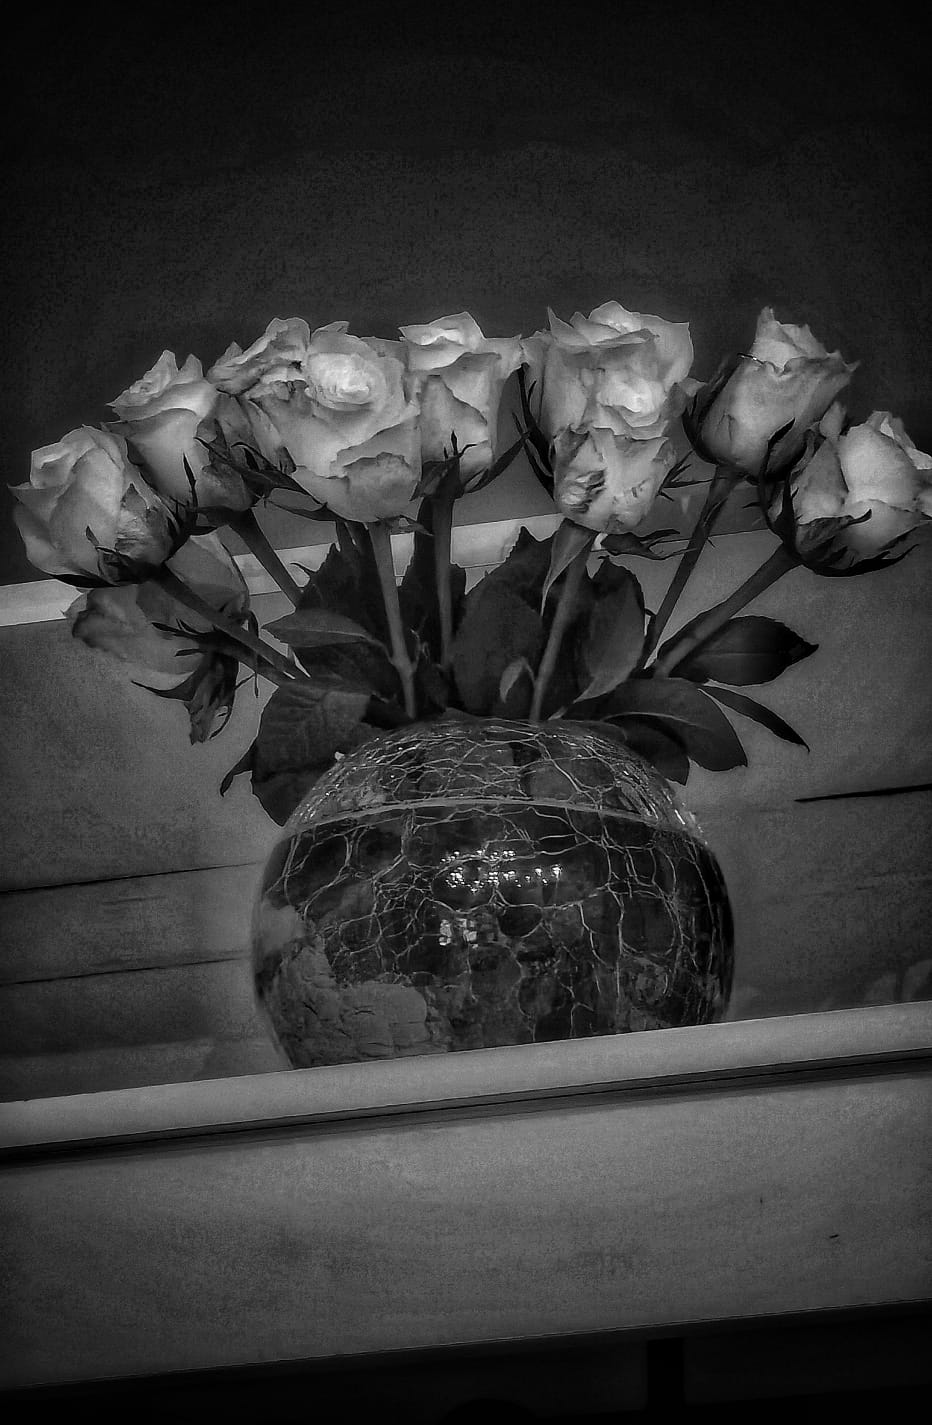 Black and white picture of flowers in a vase